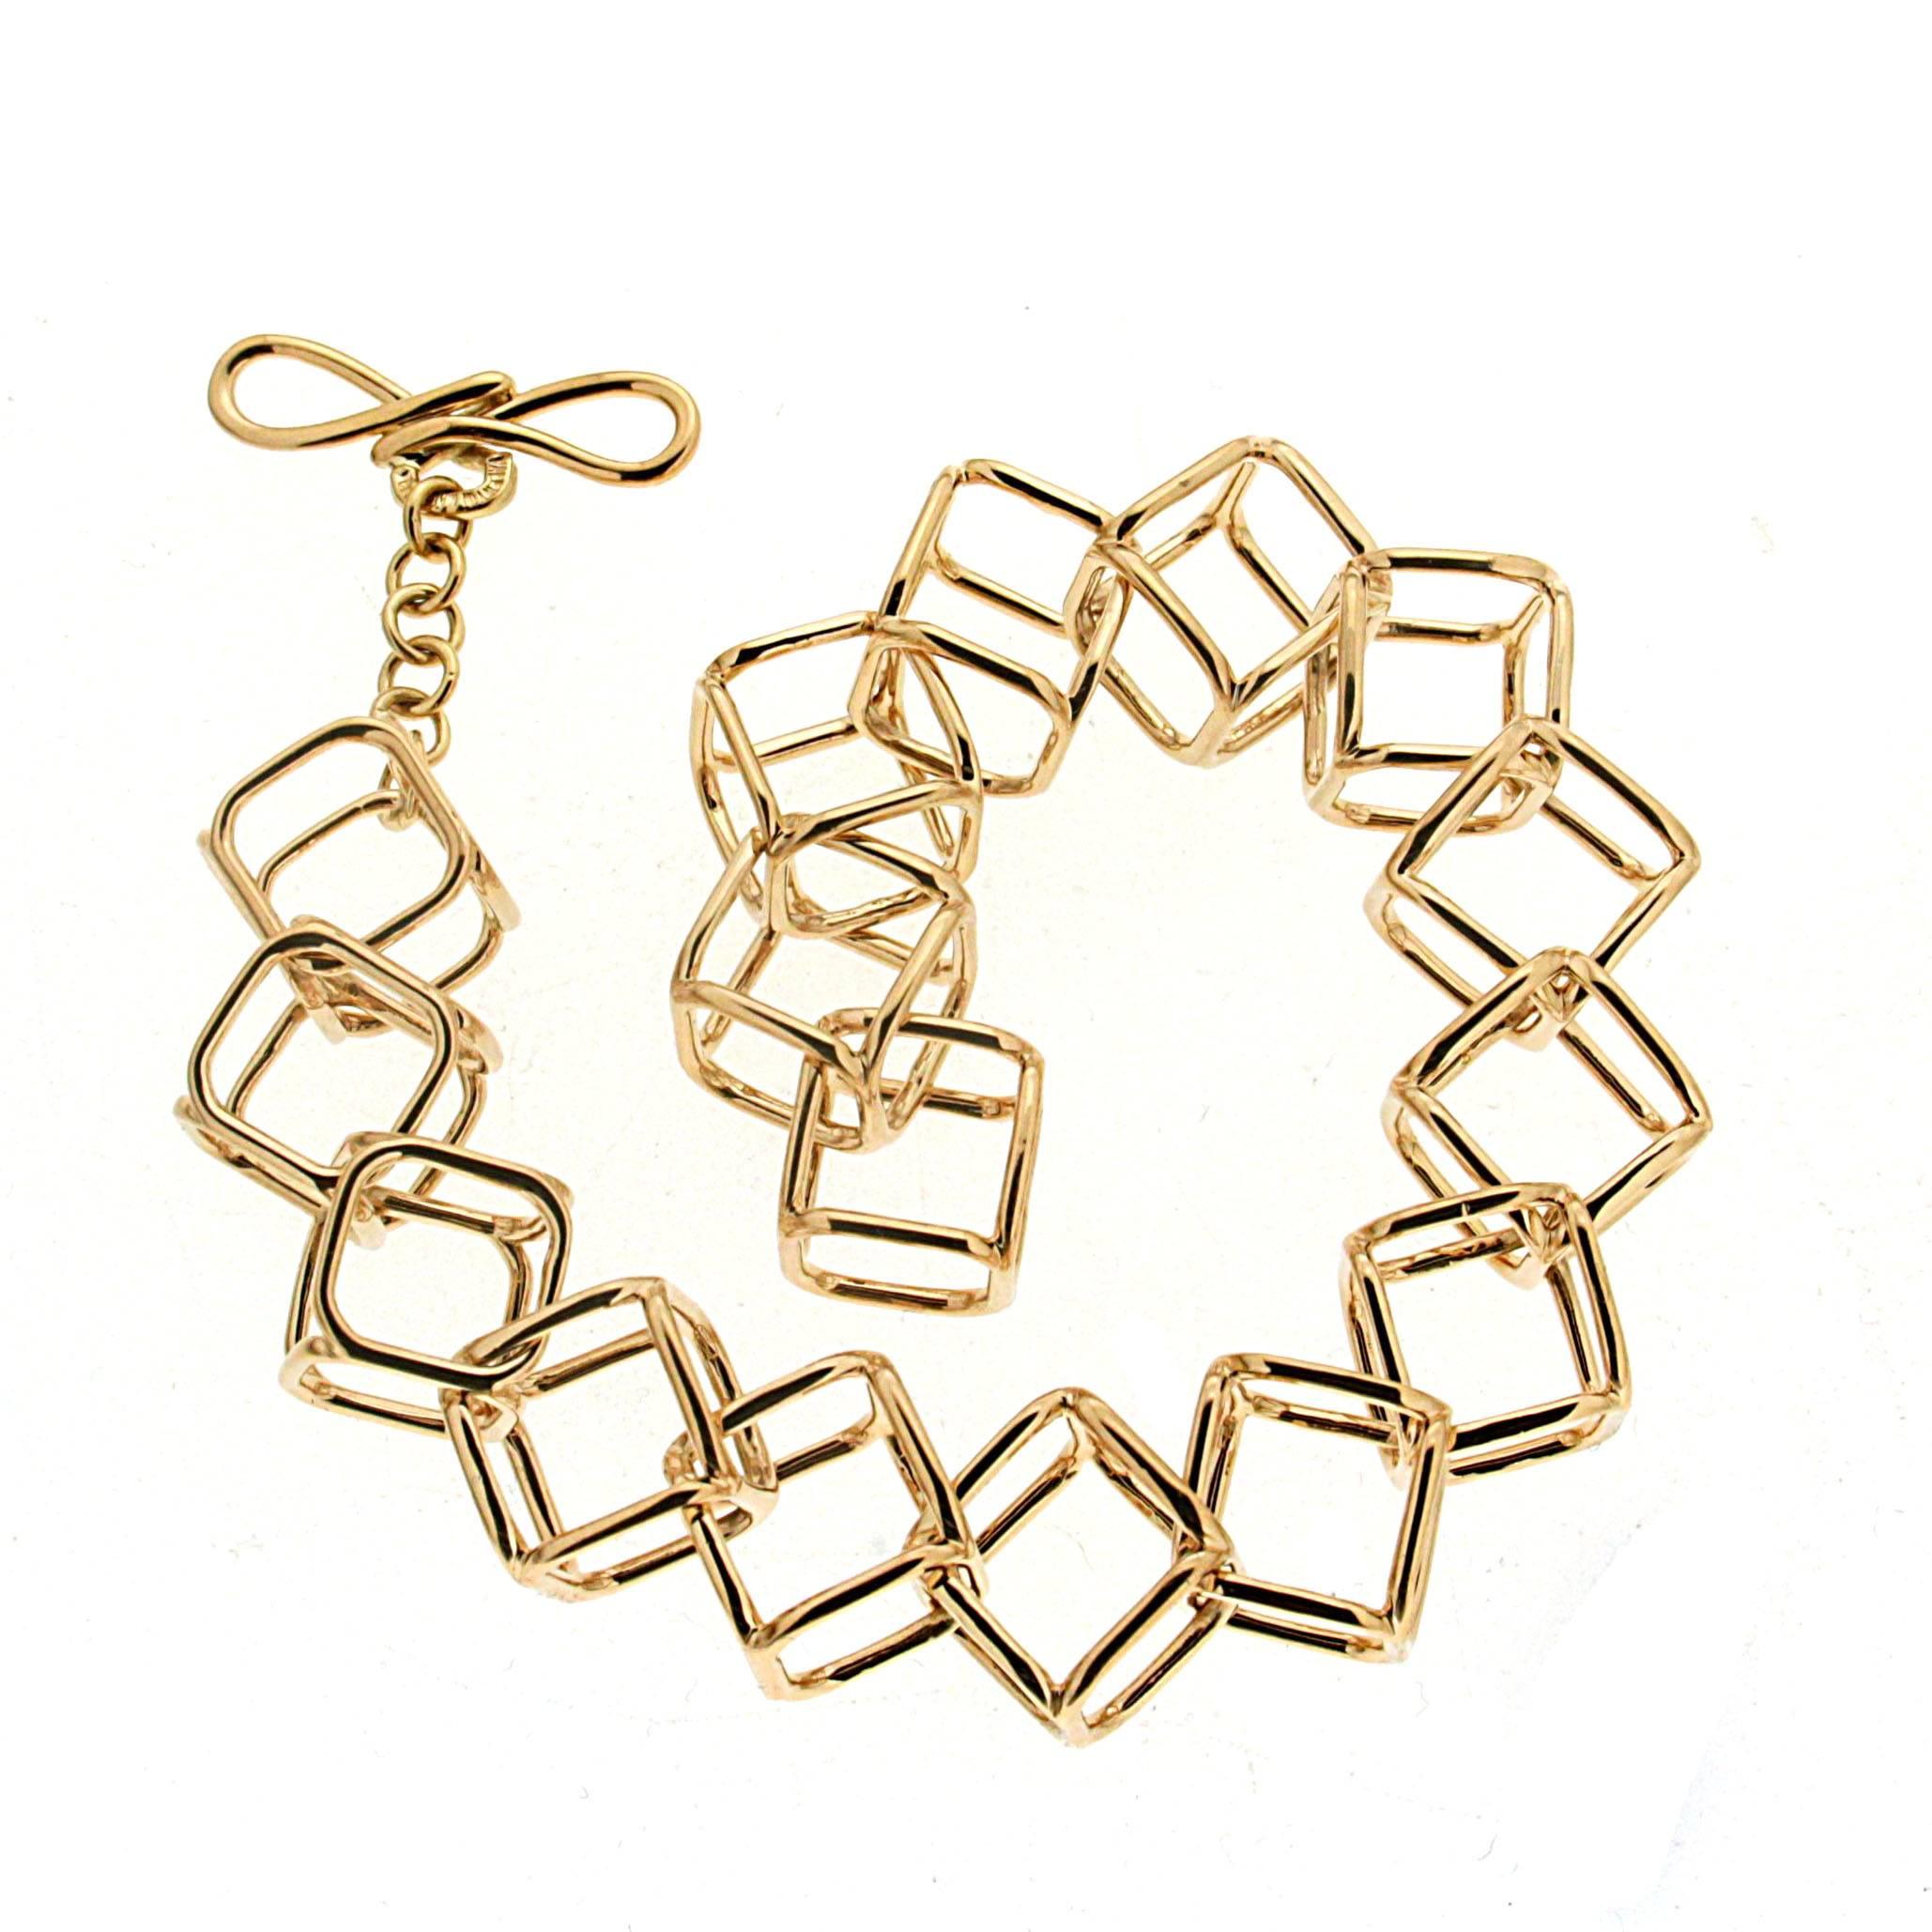 This lovely Interlocking Cushion Cube Link Bracelet is made in 18kt yellow gold with ring and toggle. There are matching necklace and earrings.